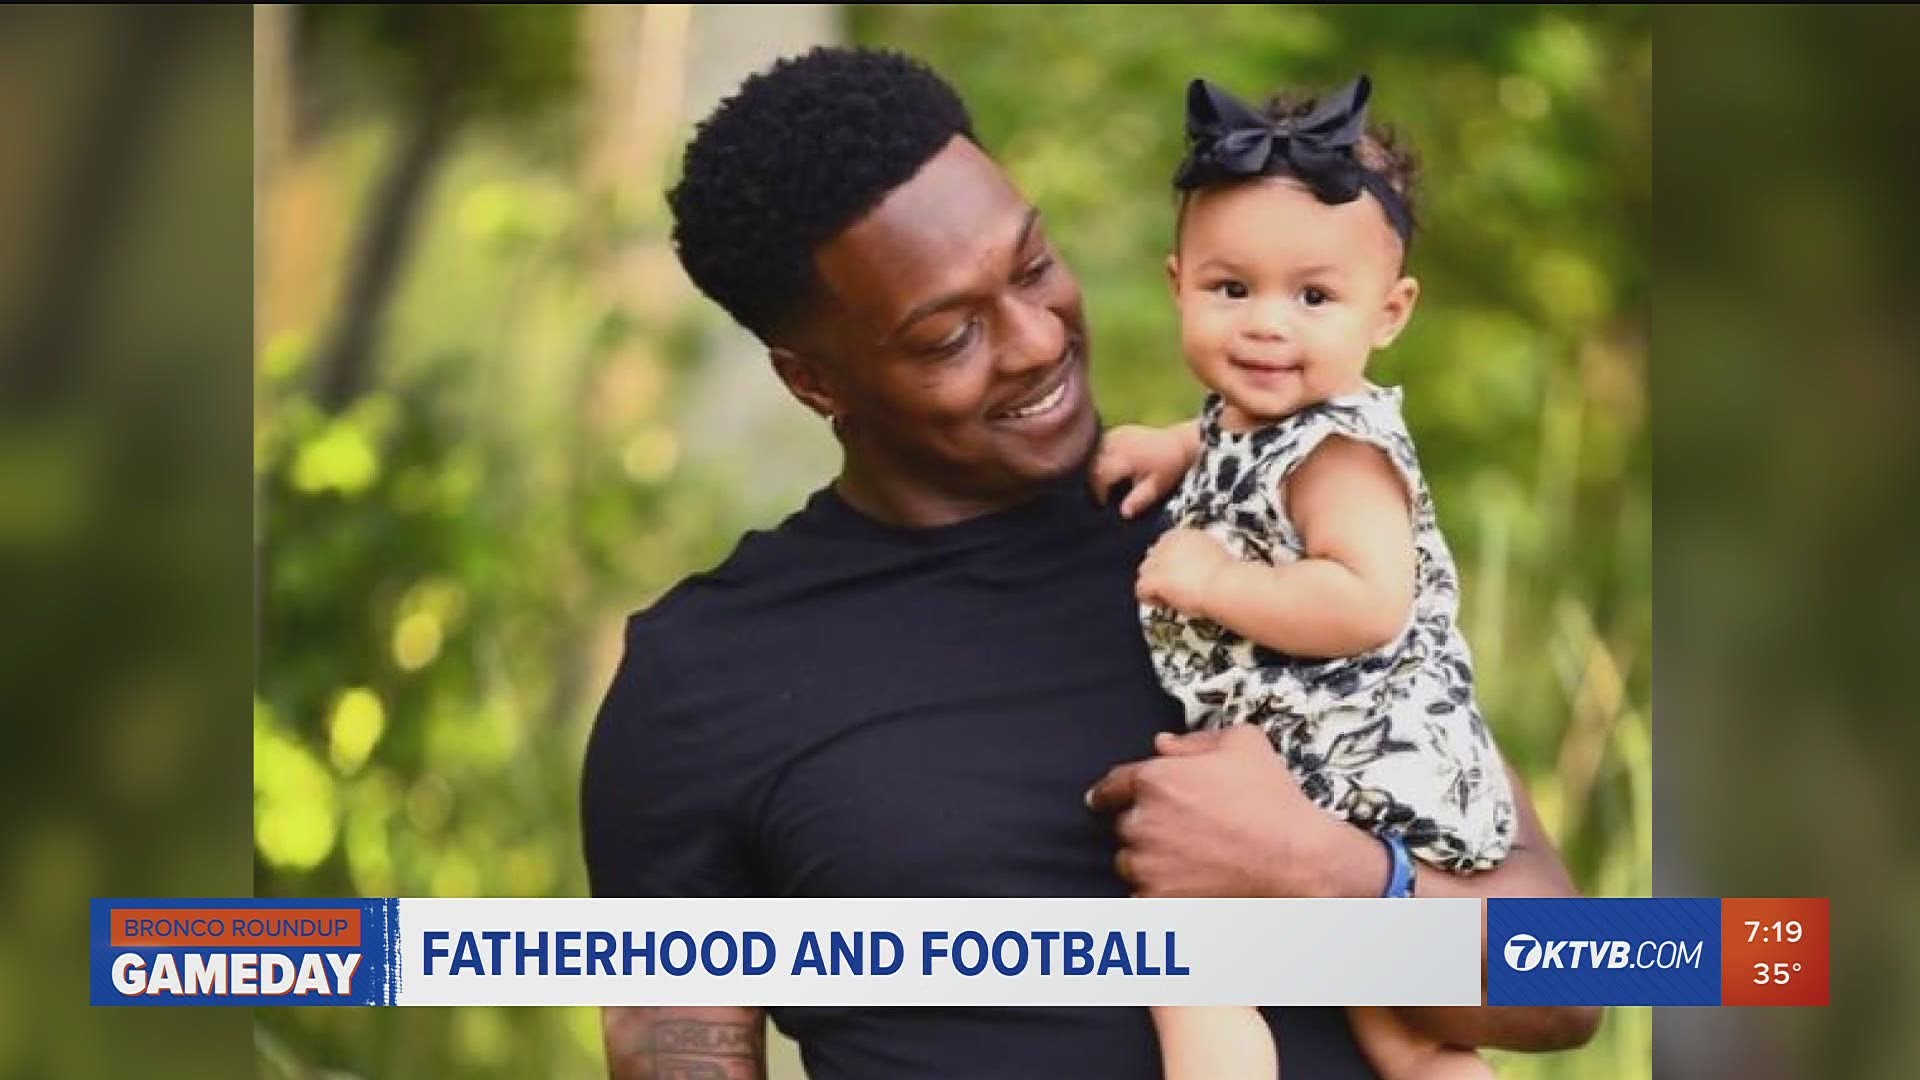 The star wide receiver has been playing some of his best football since he joined the program after he had his daughter last season.